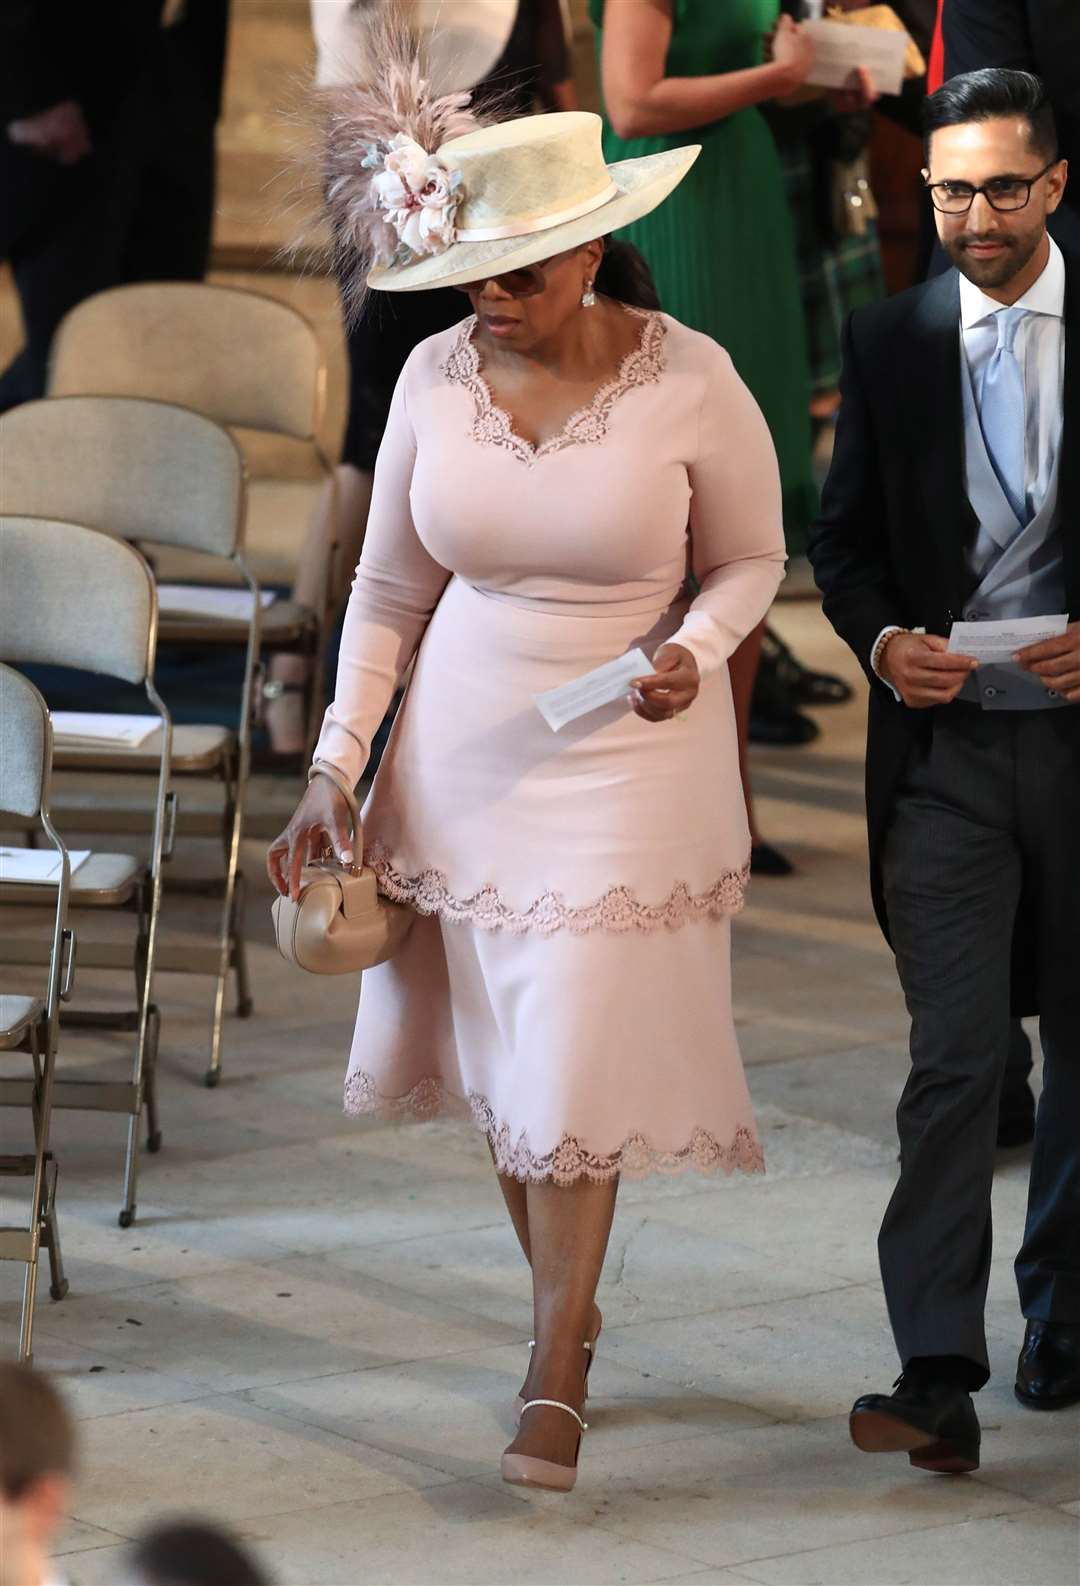 Oprah Winfrey arrives in St George’s Chapel at Windsor Castle for the wedding of Prince Harry and Meghan Markle.